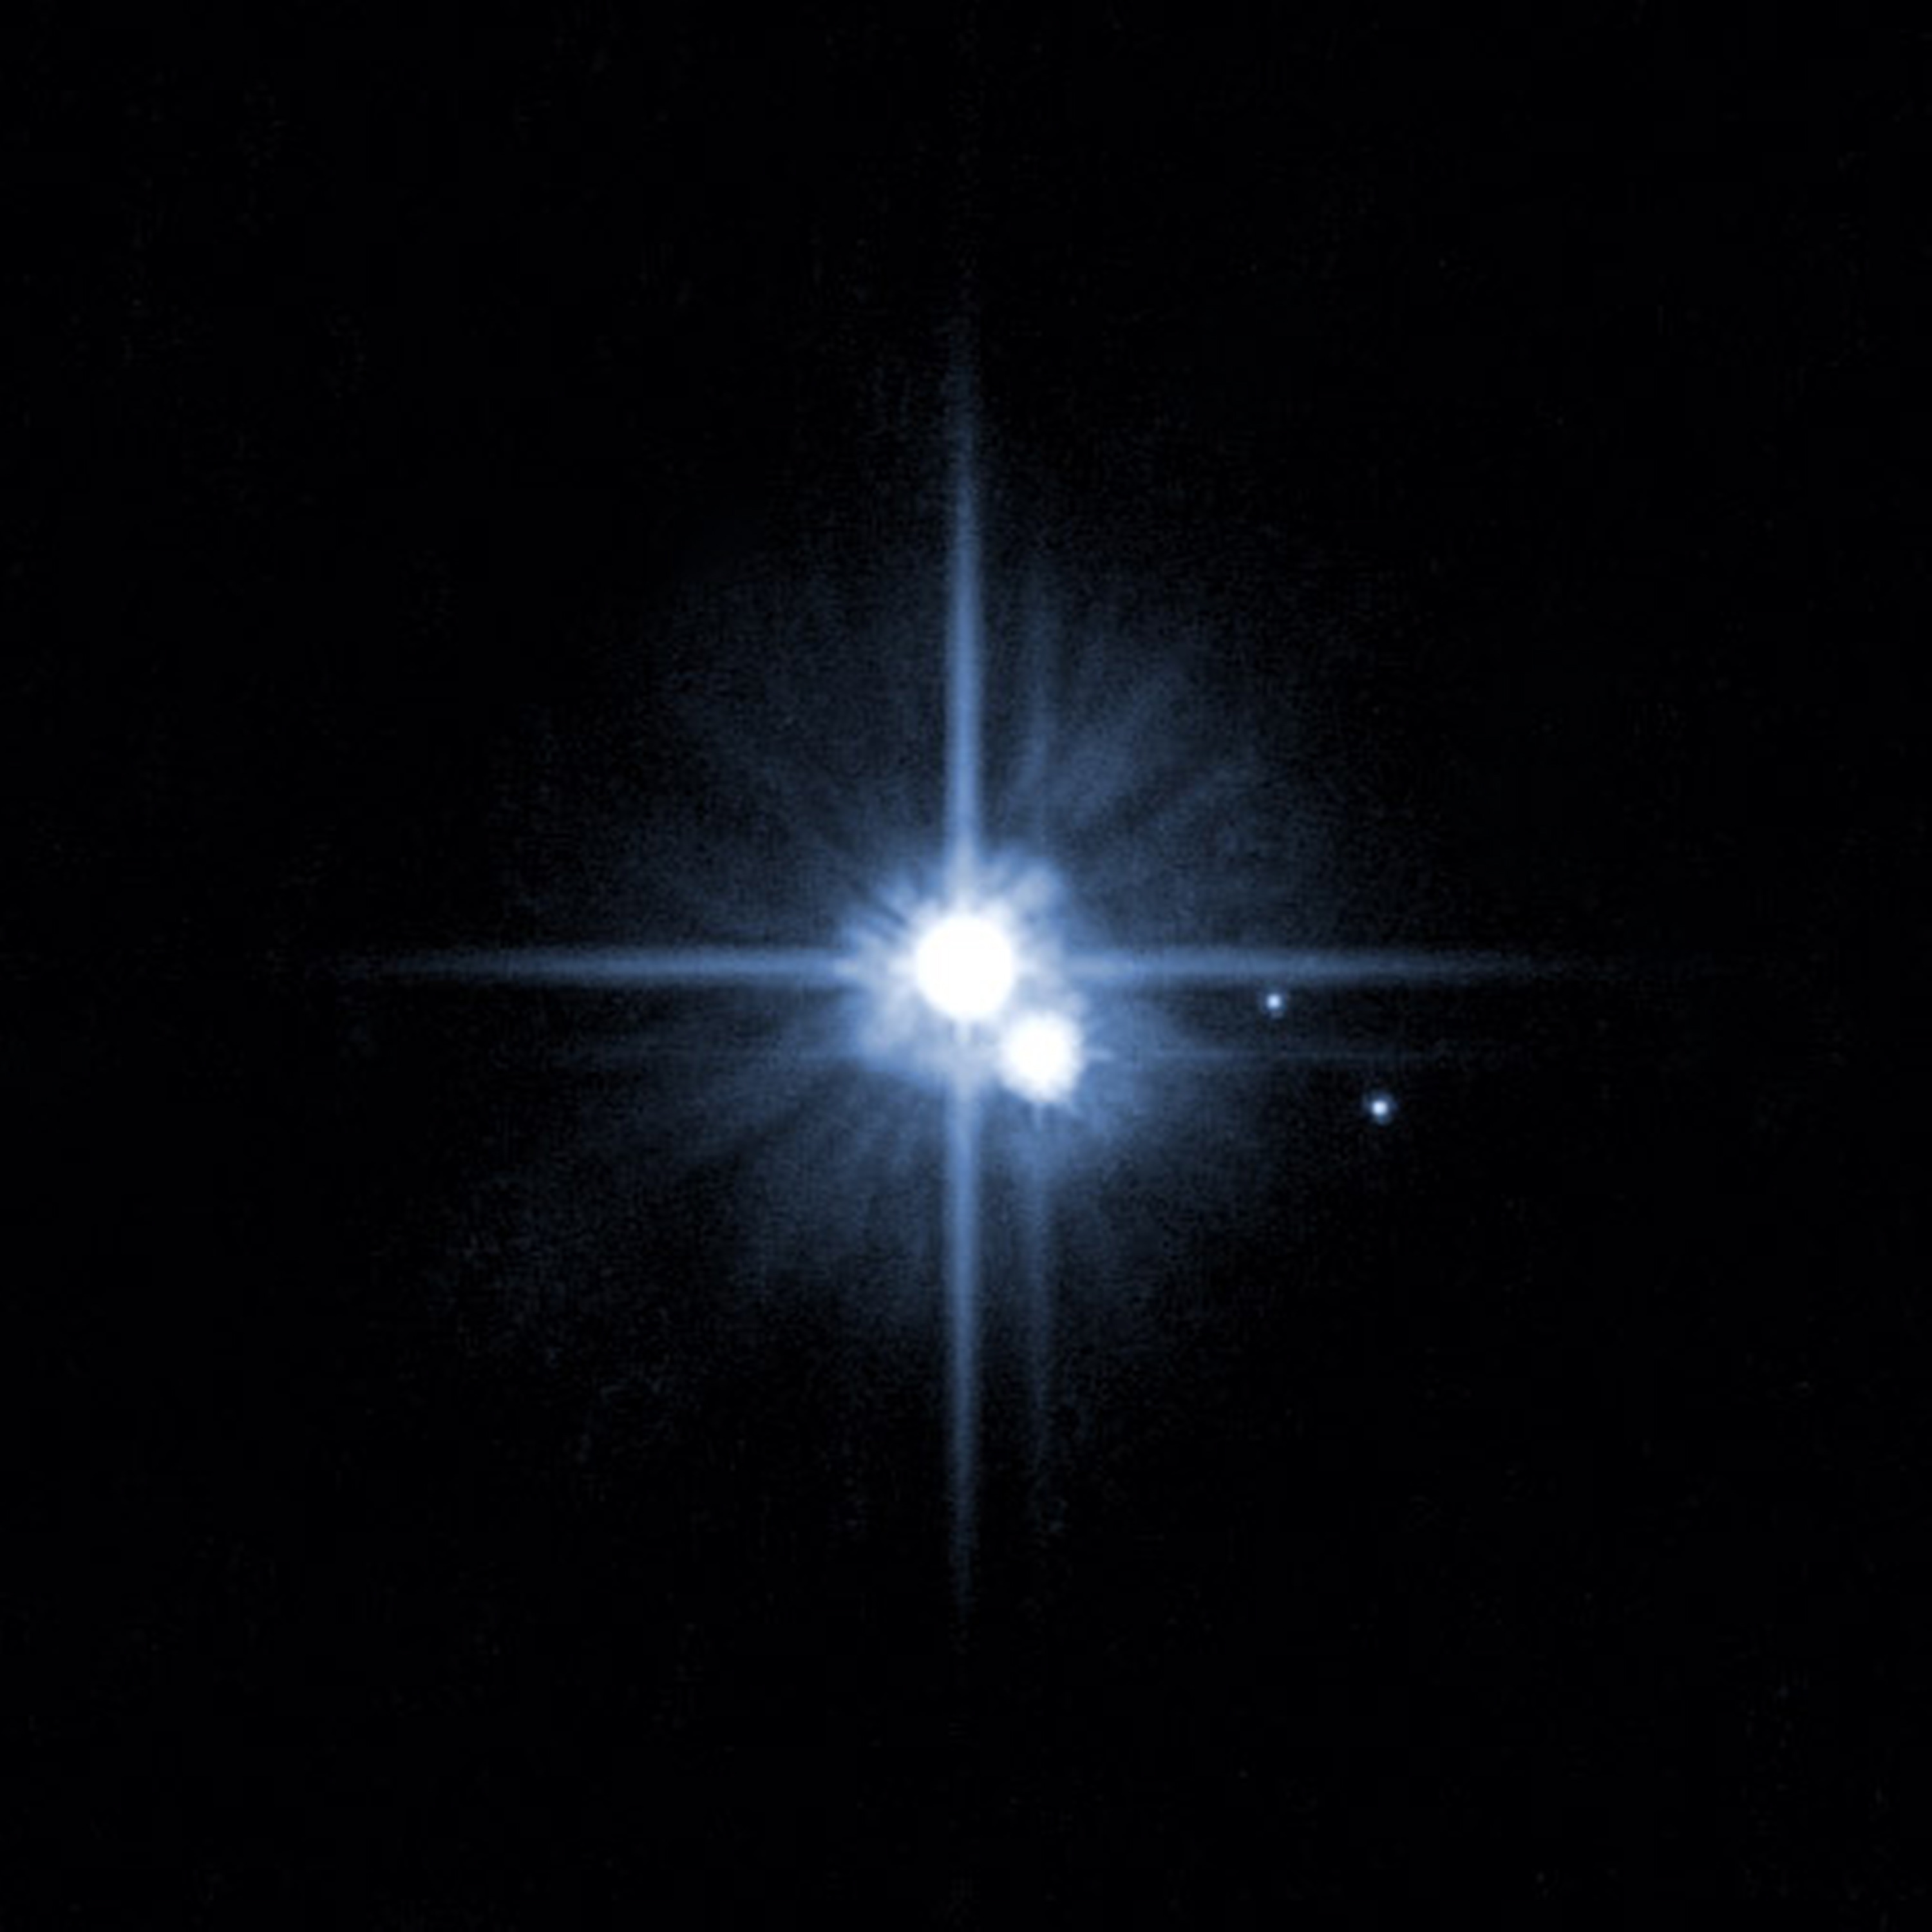 NASA Hubble Space Telescope
Pluto and three of its five moons